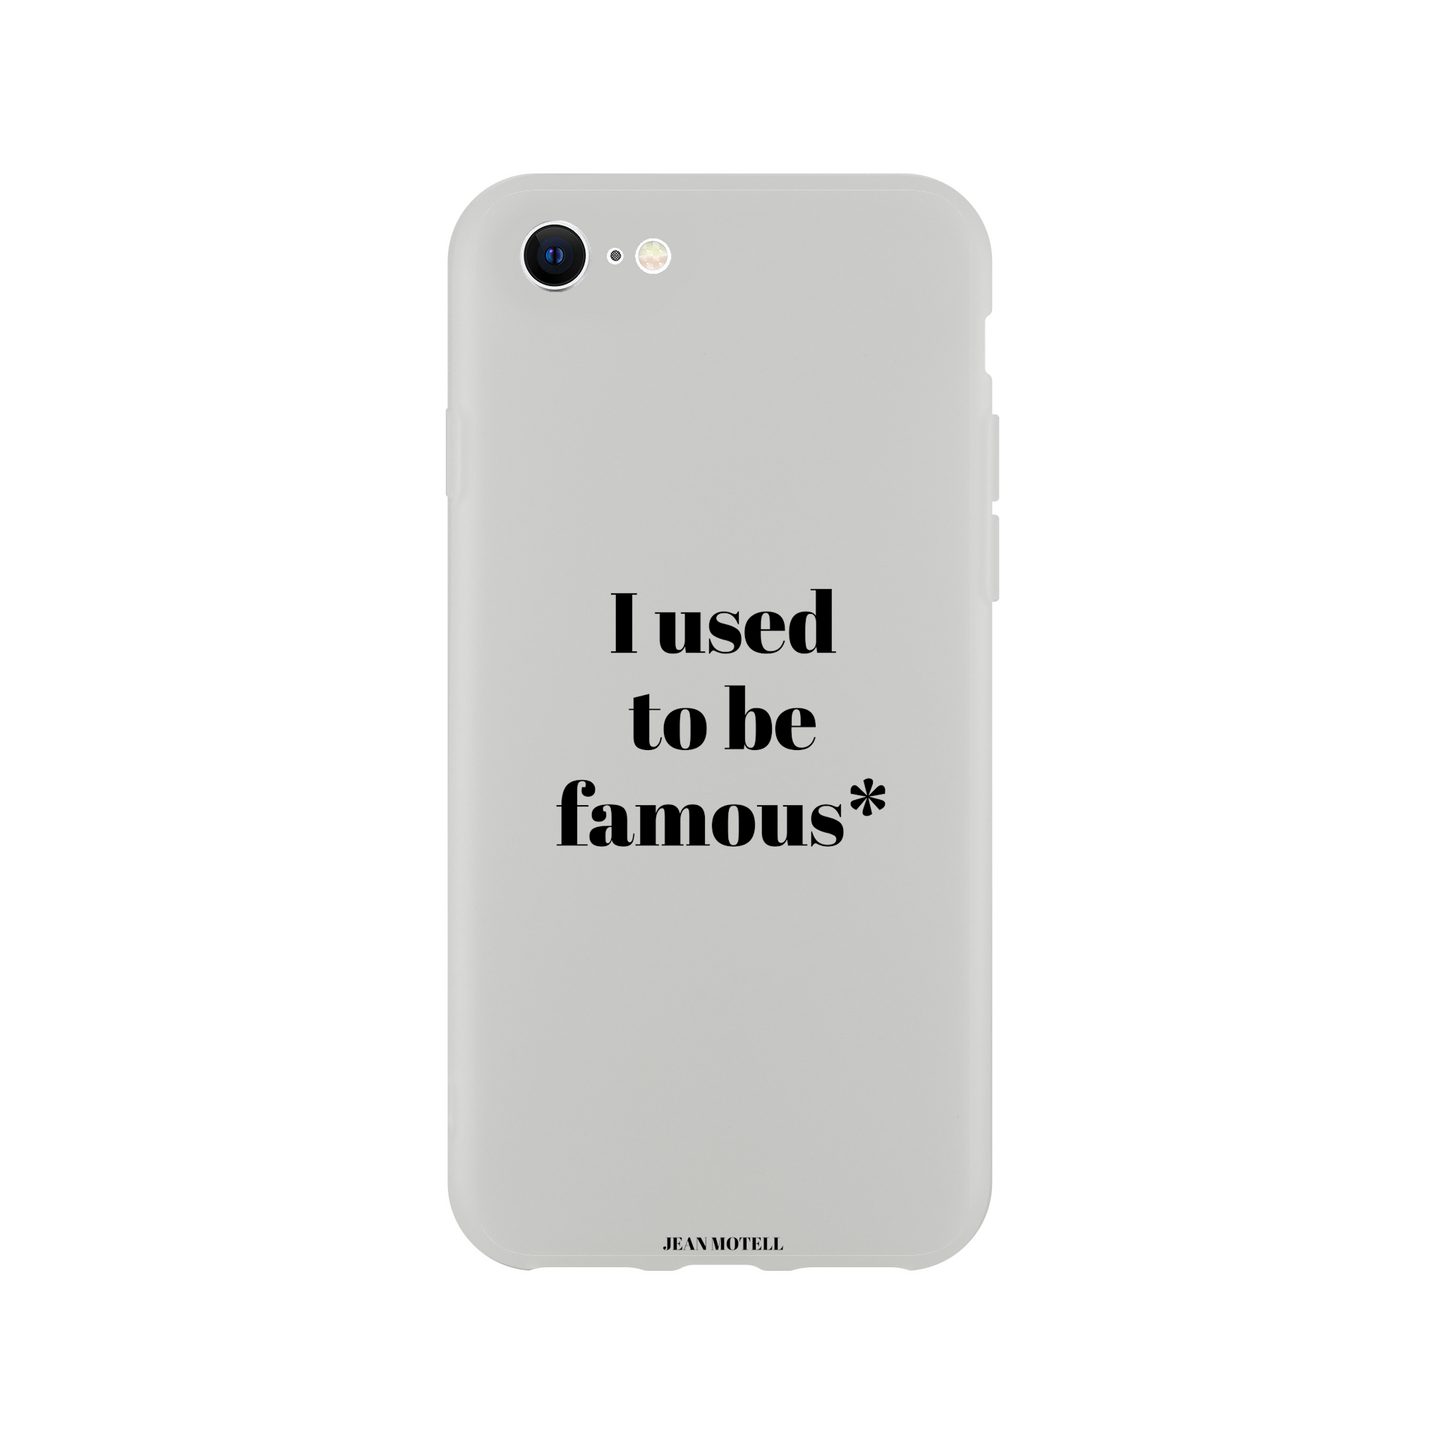 iPhone Flexi case I used to be famous